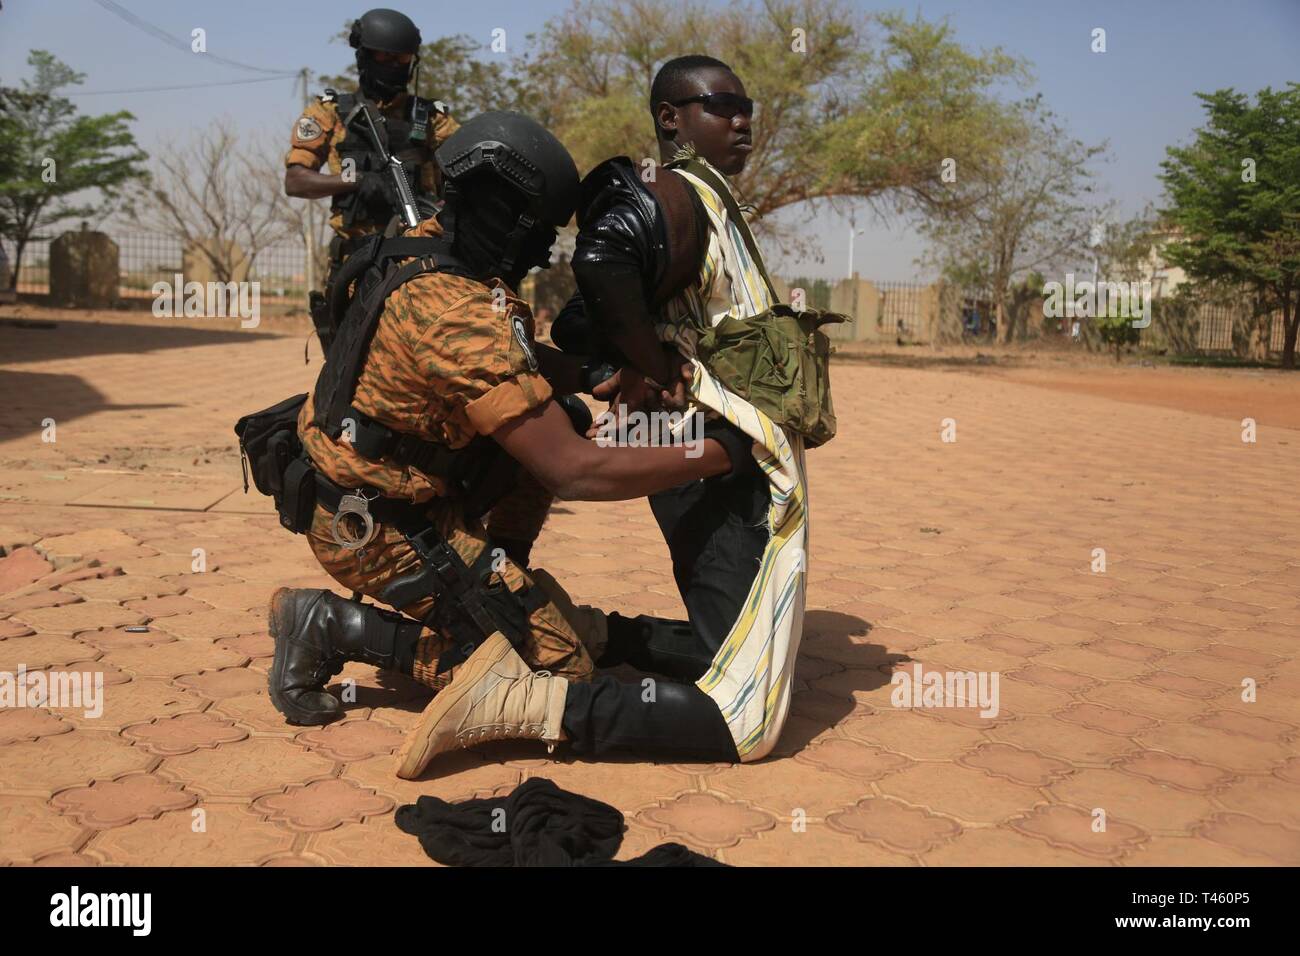 Burkina Faso Soldiers, assigned Special Program Embassy Augmentation Response (SPEAR) apprehend a terrorist actor during a simulated hostage situation in Ouagadougou, Burkina Faso on Feb. 27, 2019. The SPEAR soldiers demonstrated their abilities to Ambassador Andrew Young and multiple others. Stock Photo